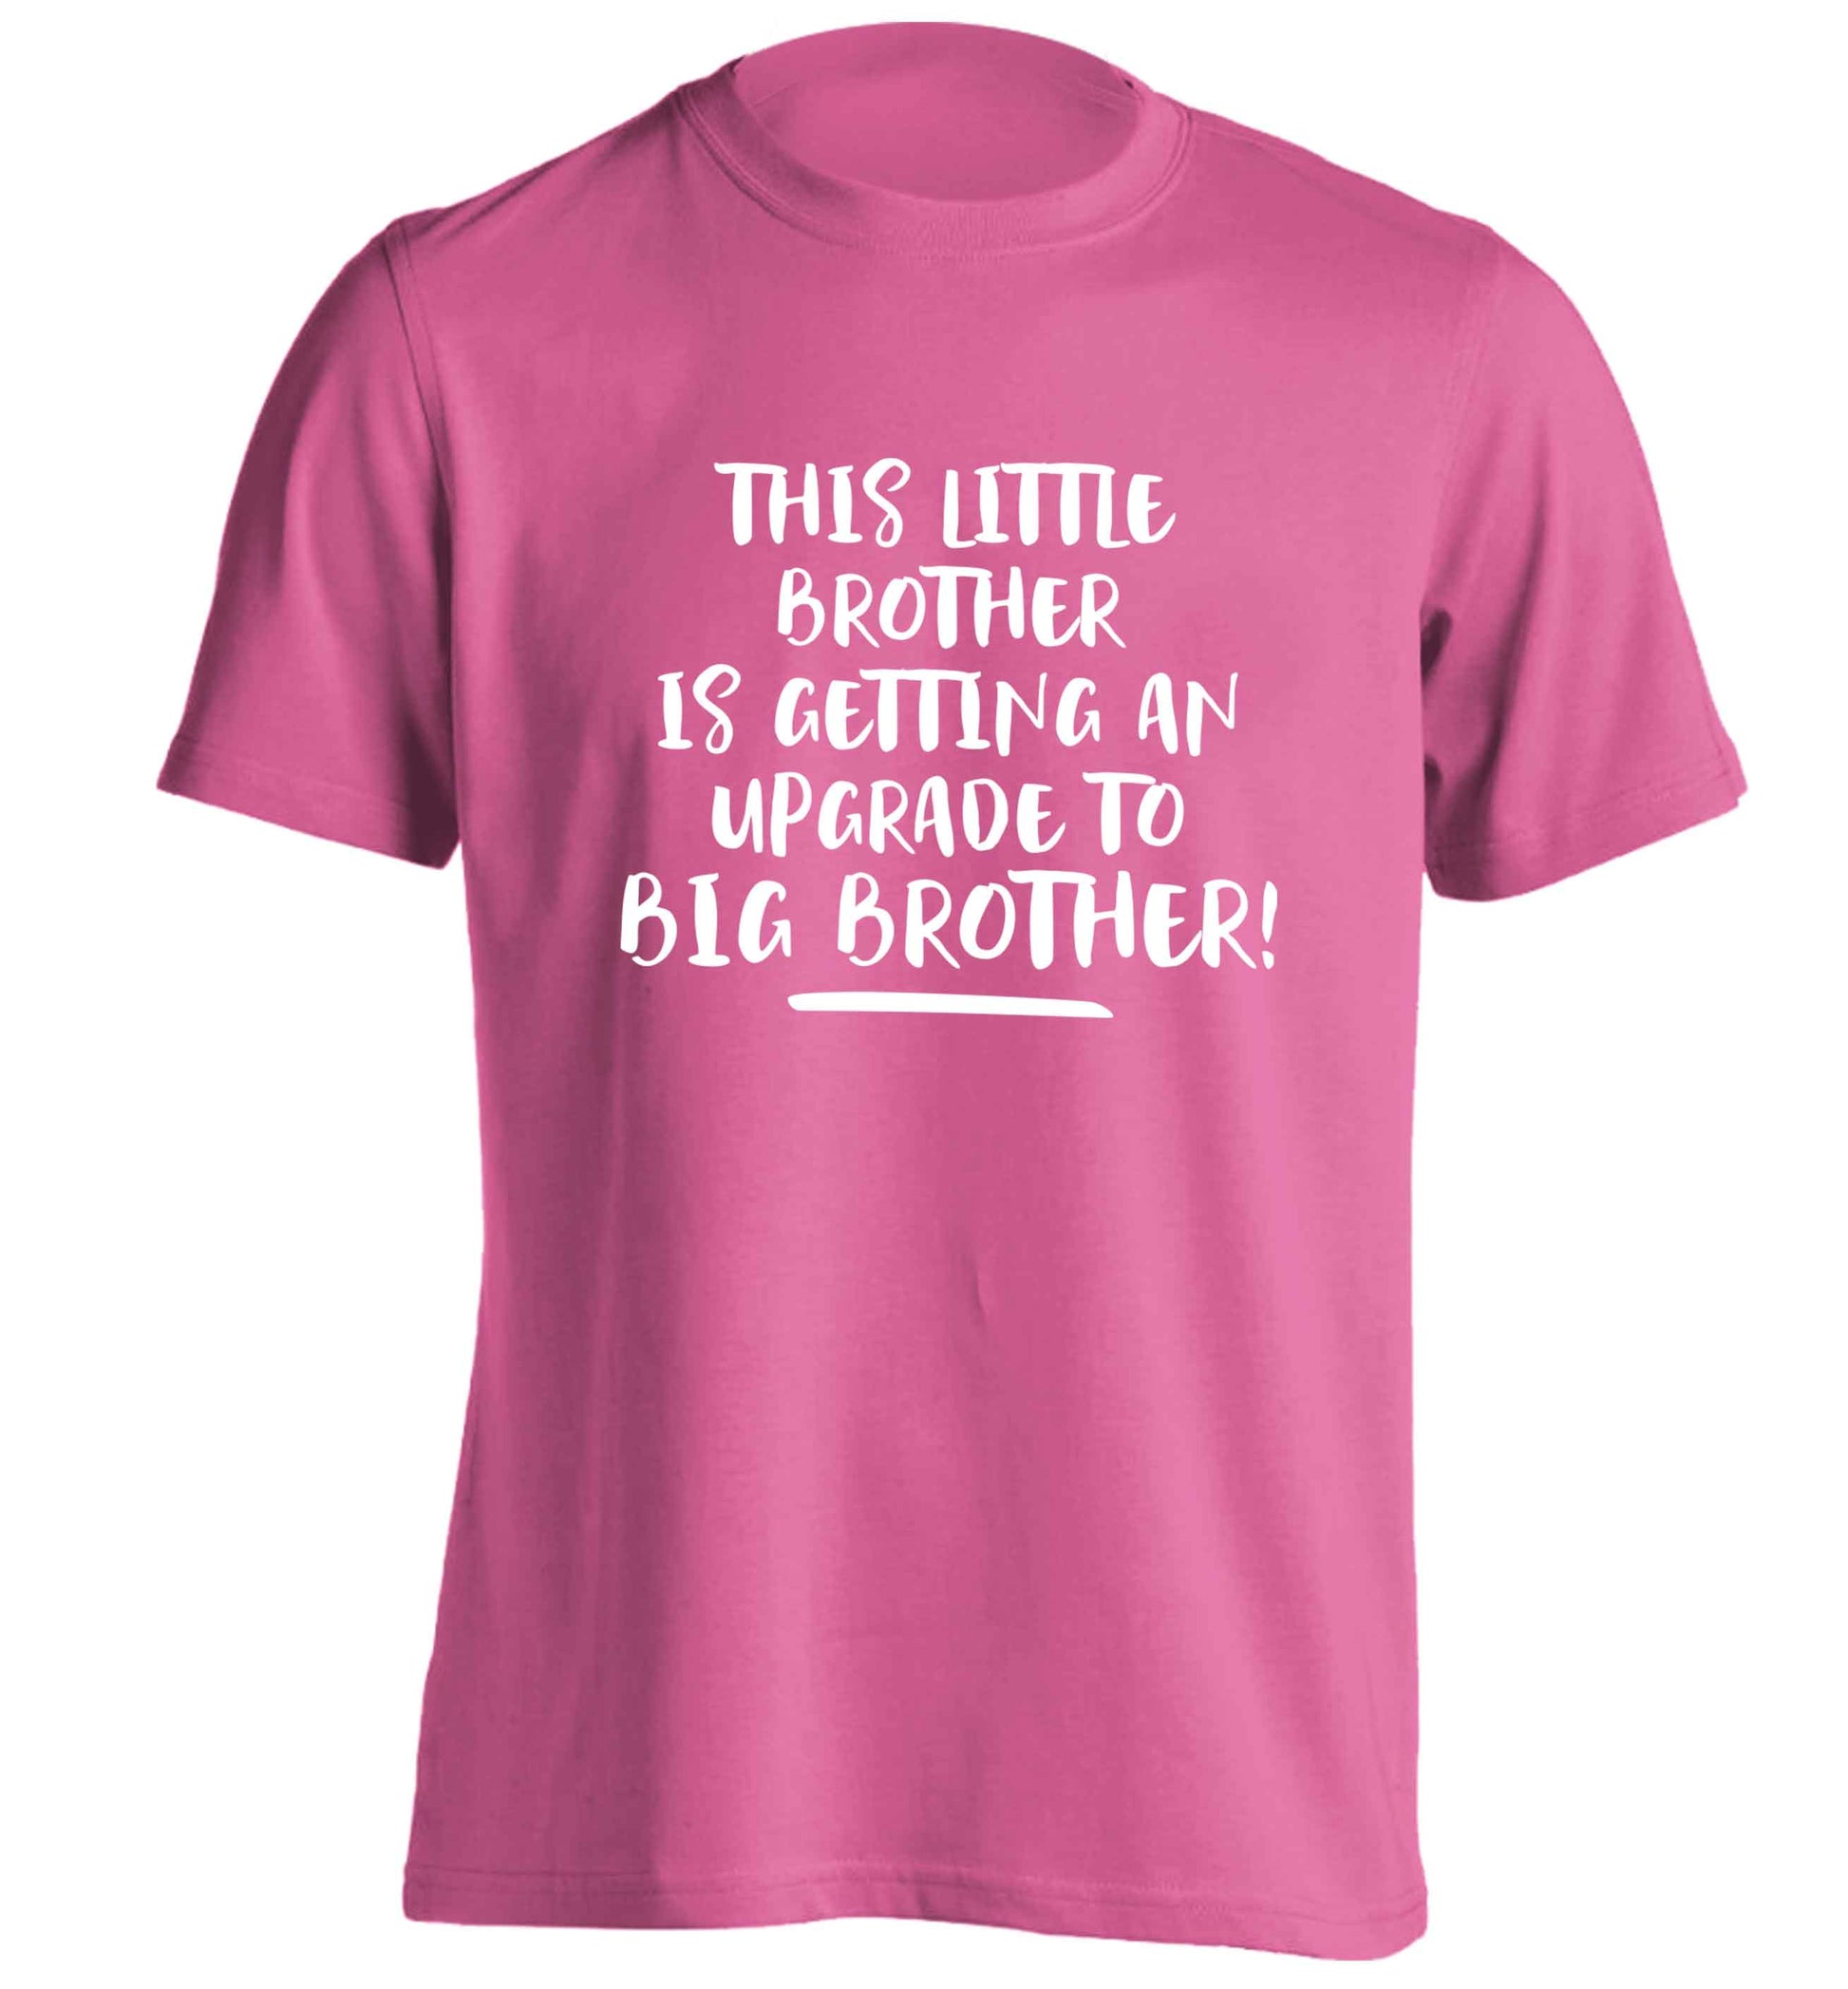 This little brother is getting an upgrade to big brother! adults unisex pink Tshirt 2XL